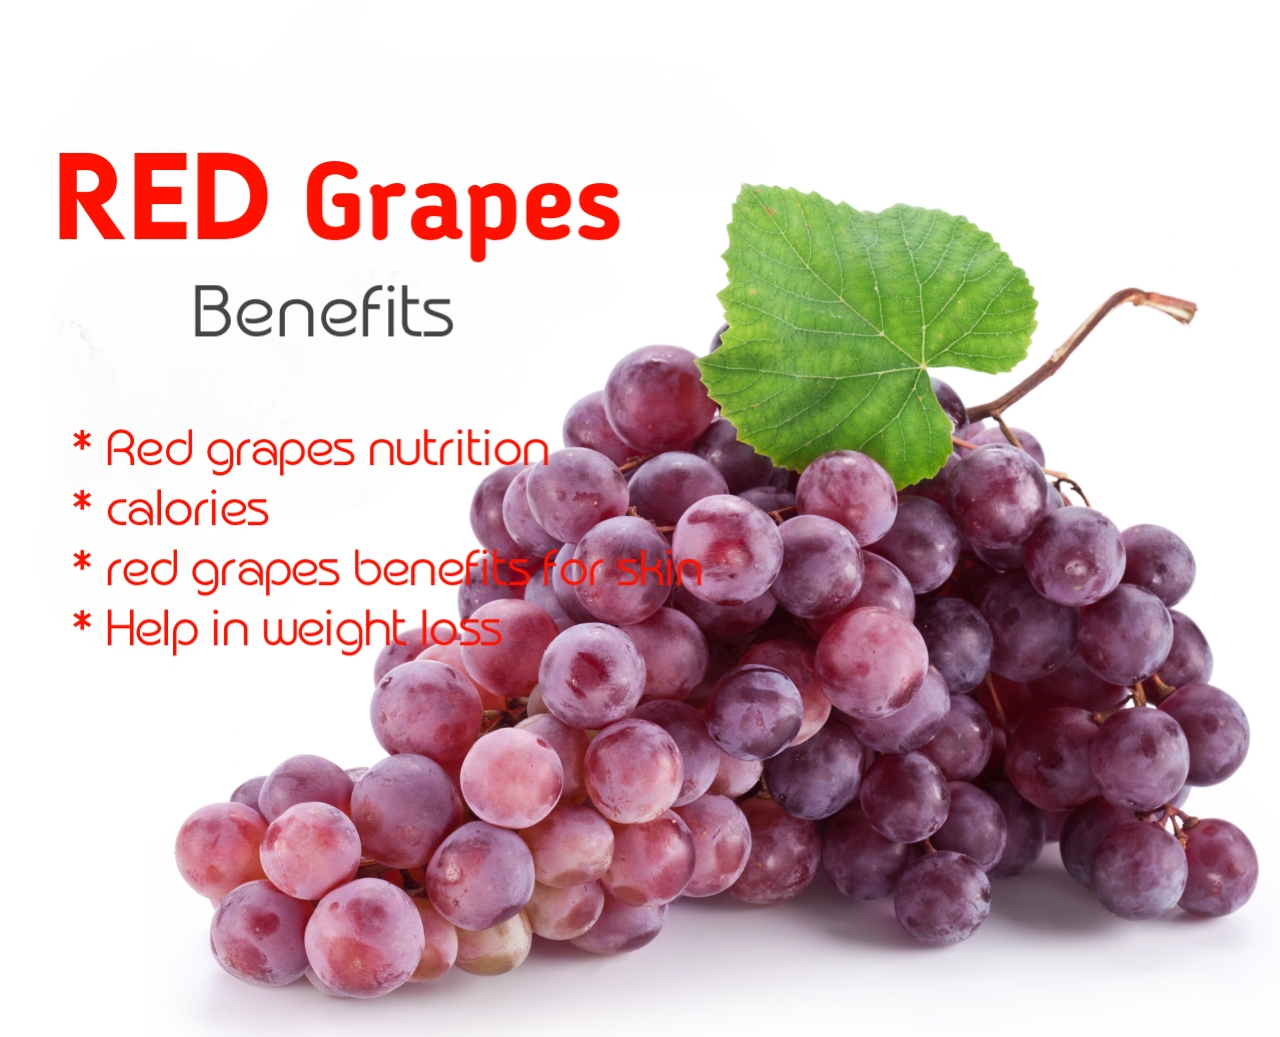 Red Grapes: The Nutritional Benefits of Consuming Them